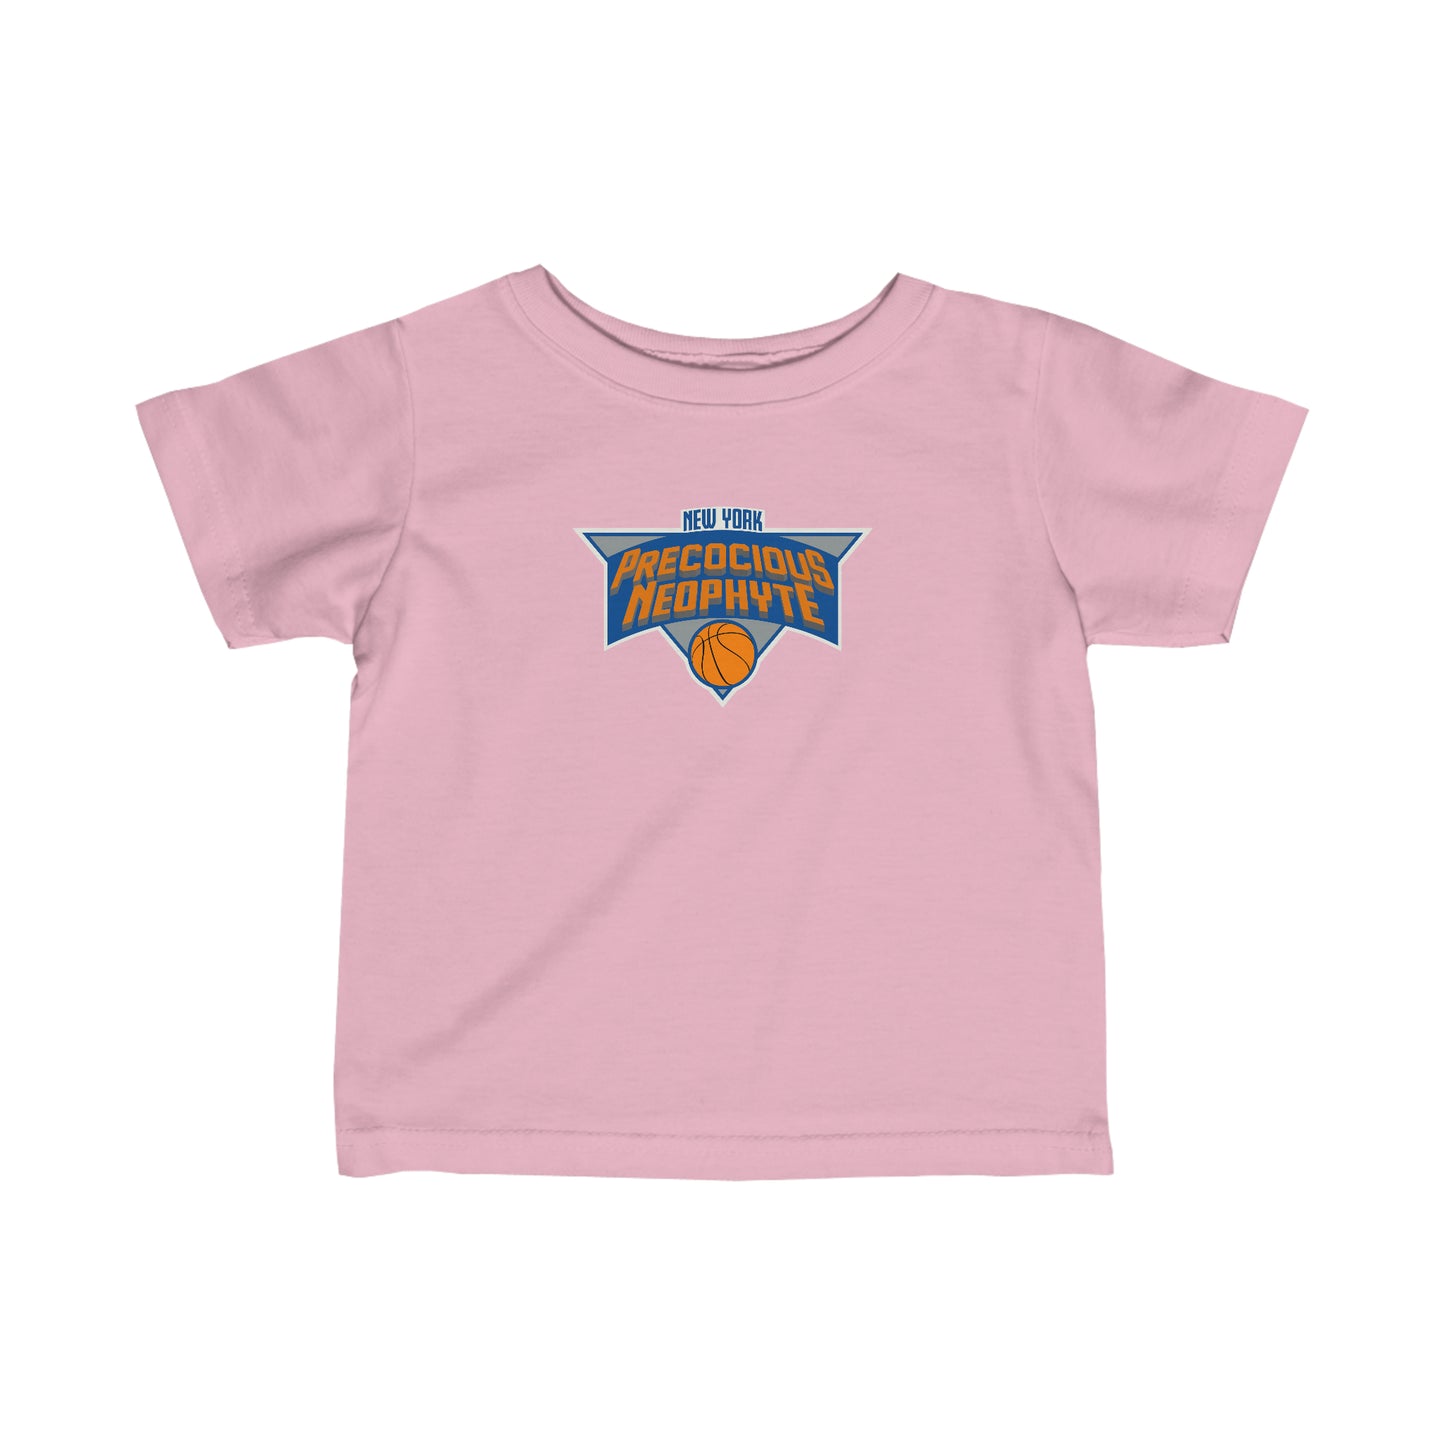 Precocious Neophyte - Baby T-Shirt